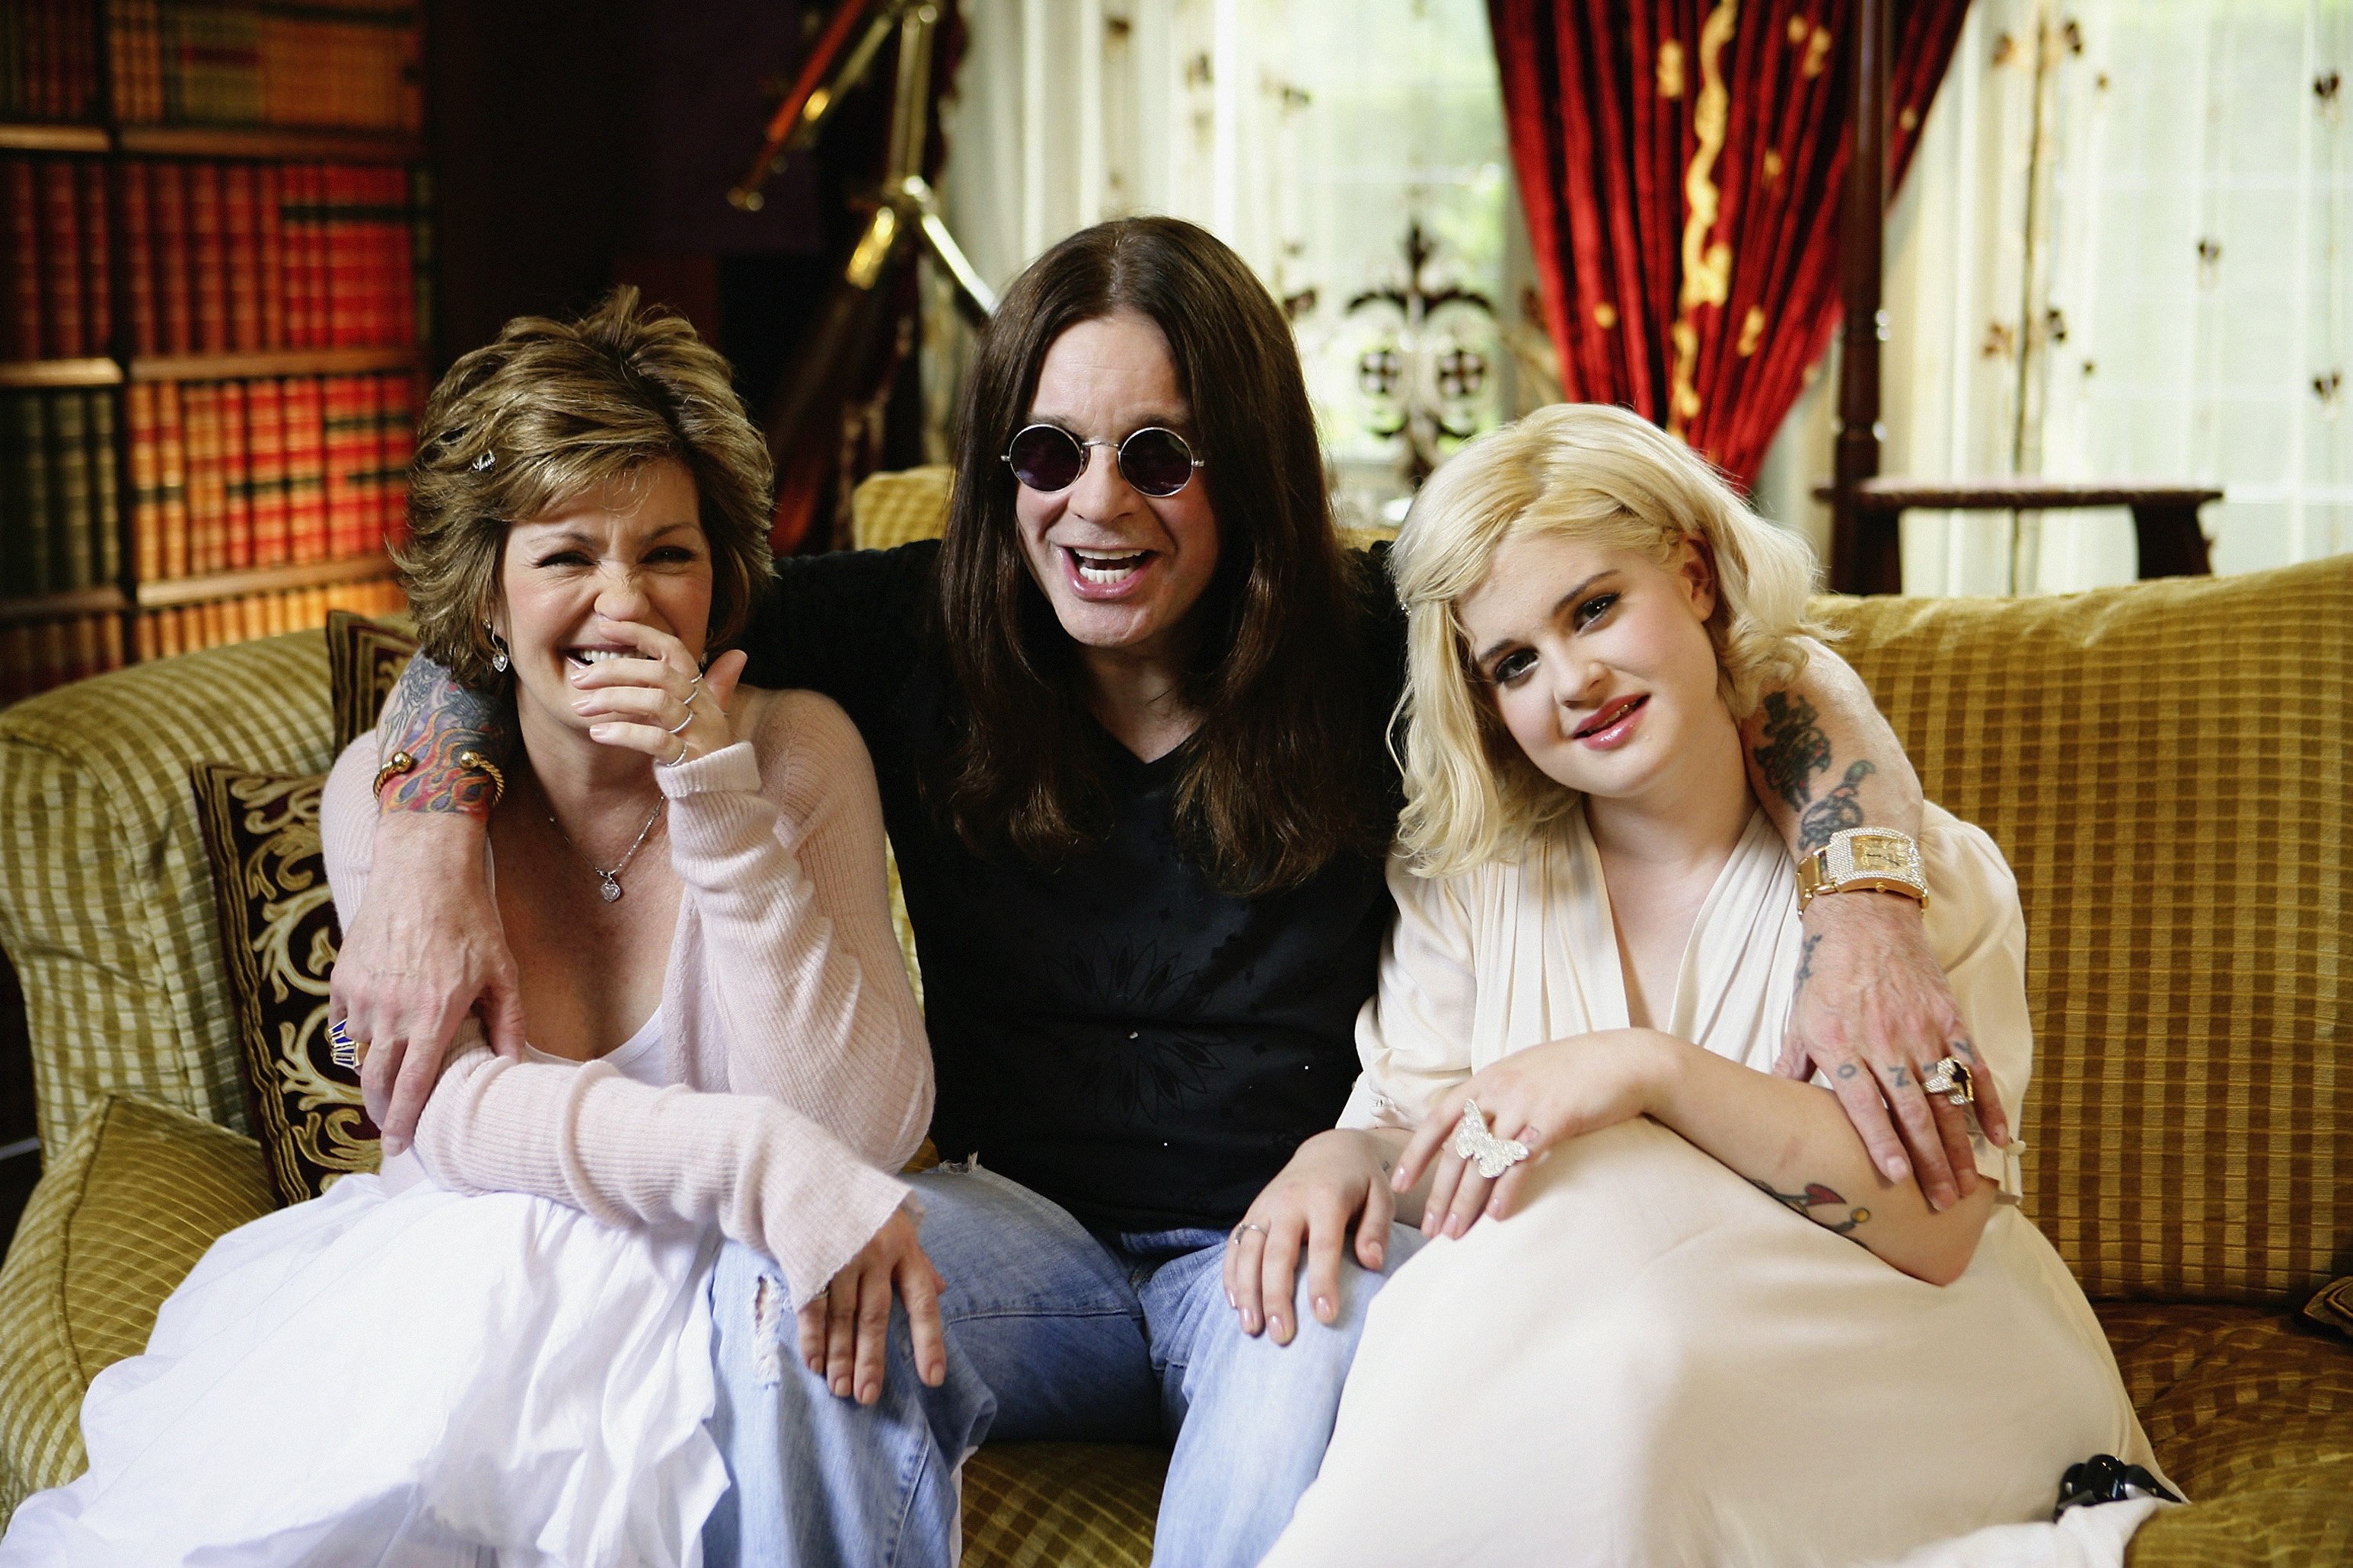 Sharon, Ozzy, and Kelly Osbourne pose for a portrait shoot at their Buckinghamshire home on June 12, 2006, in England | Source: Getty Images